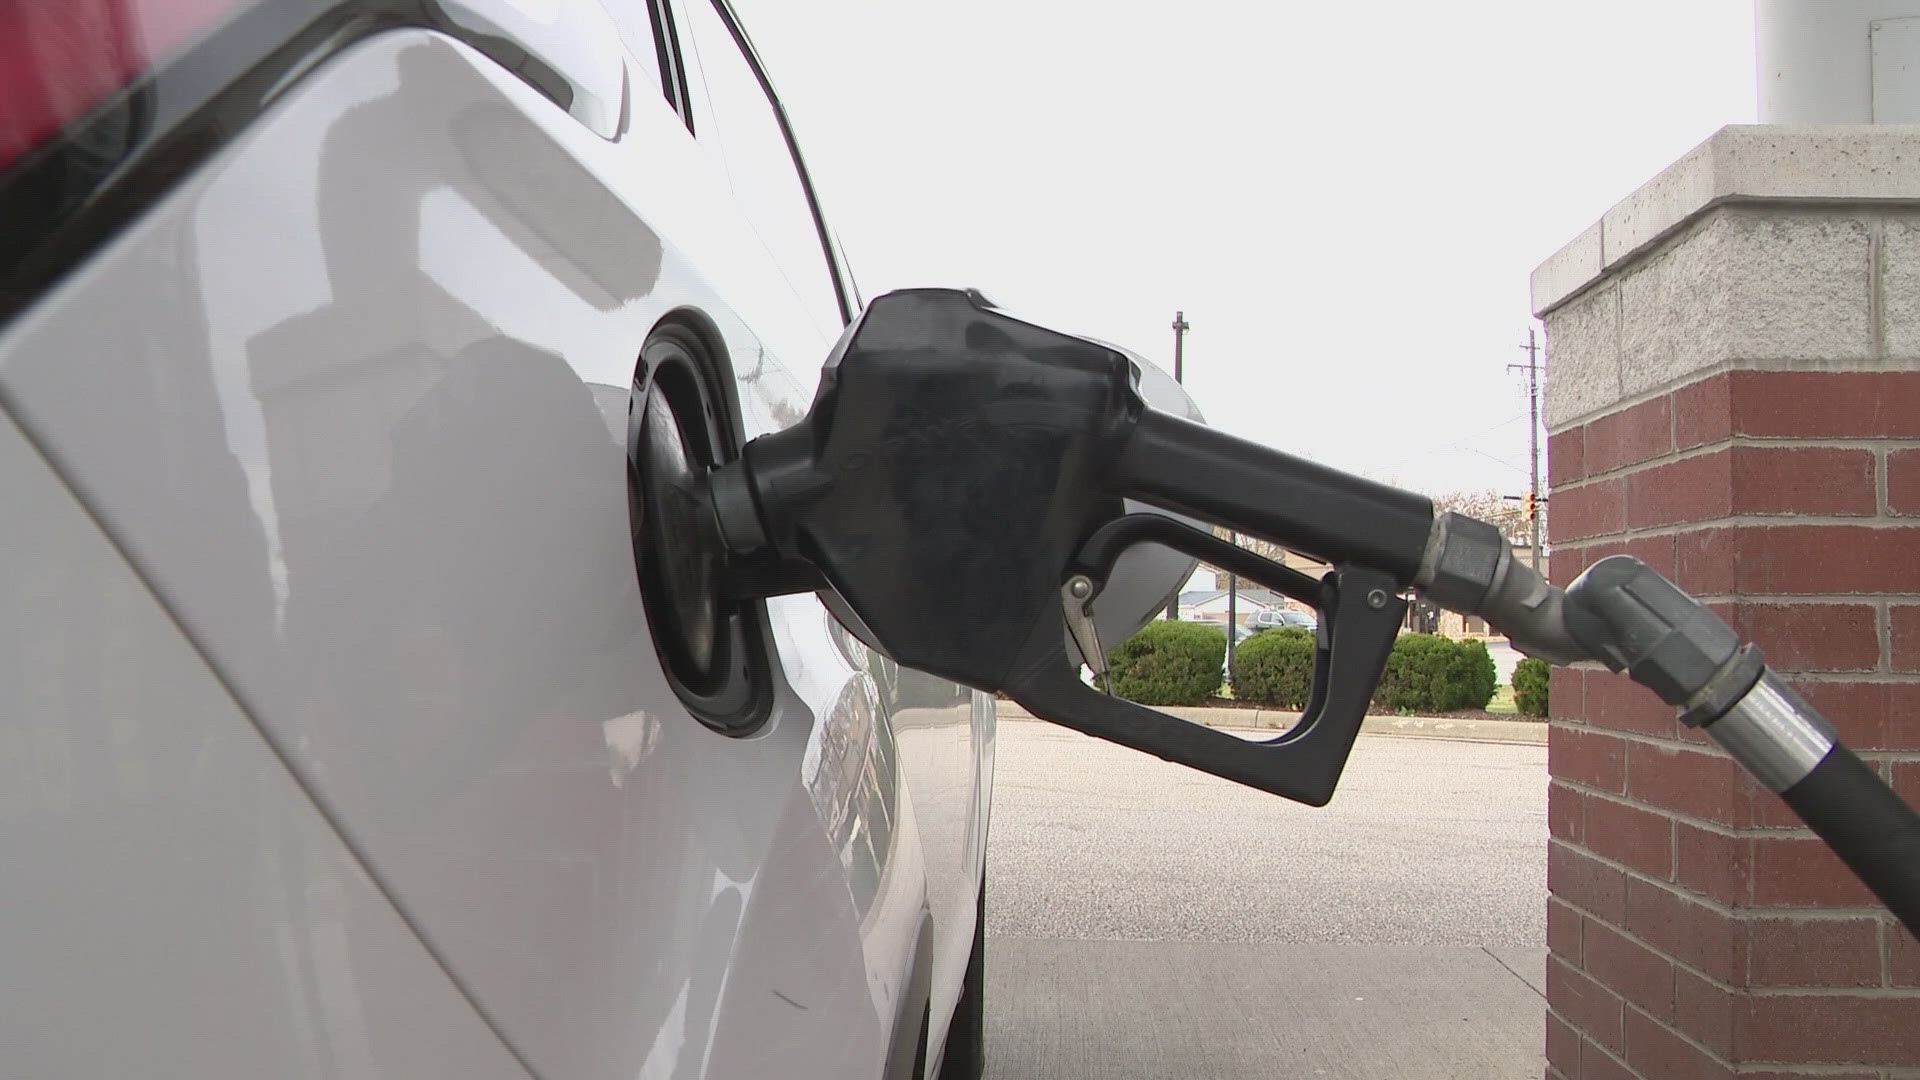 GasBuddy says the average price in Akron now stands at $3.14 per gallon, while Cleveland is listed at $3.23.